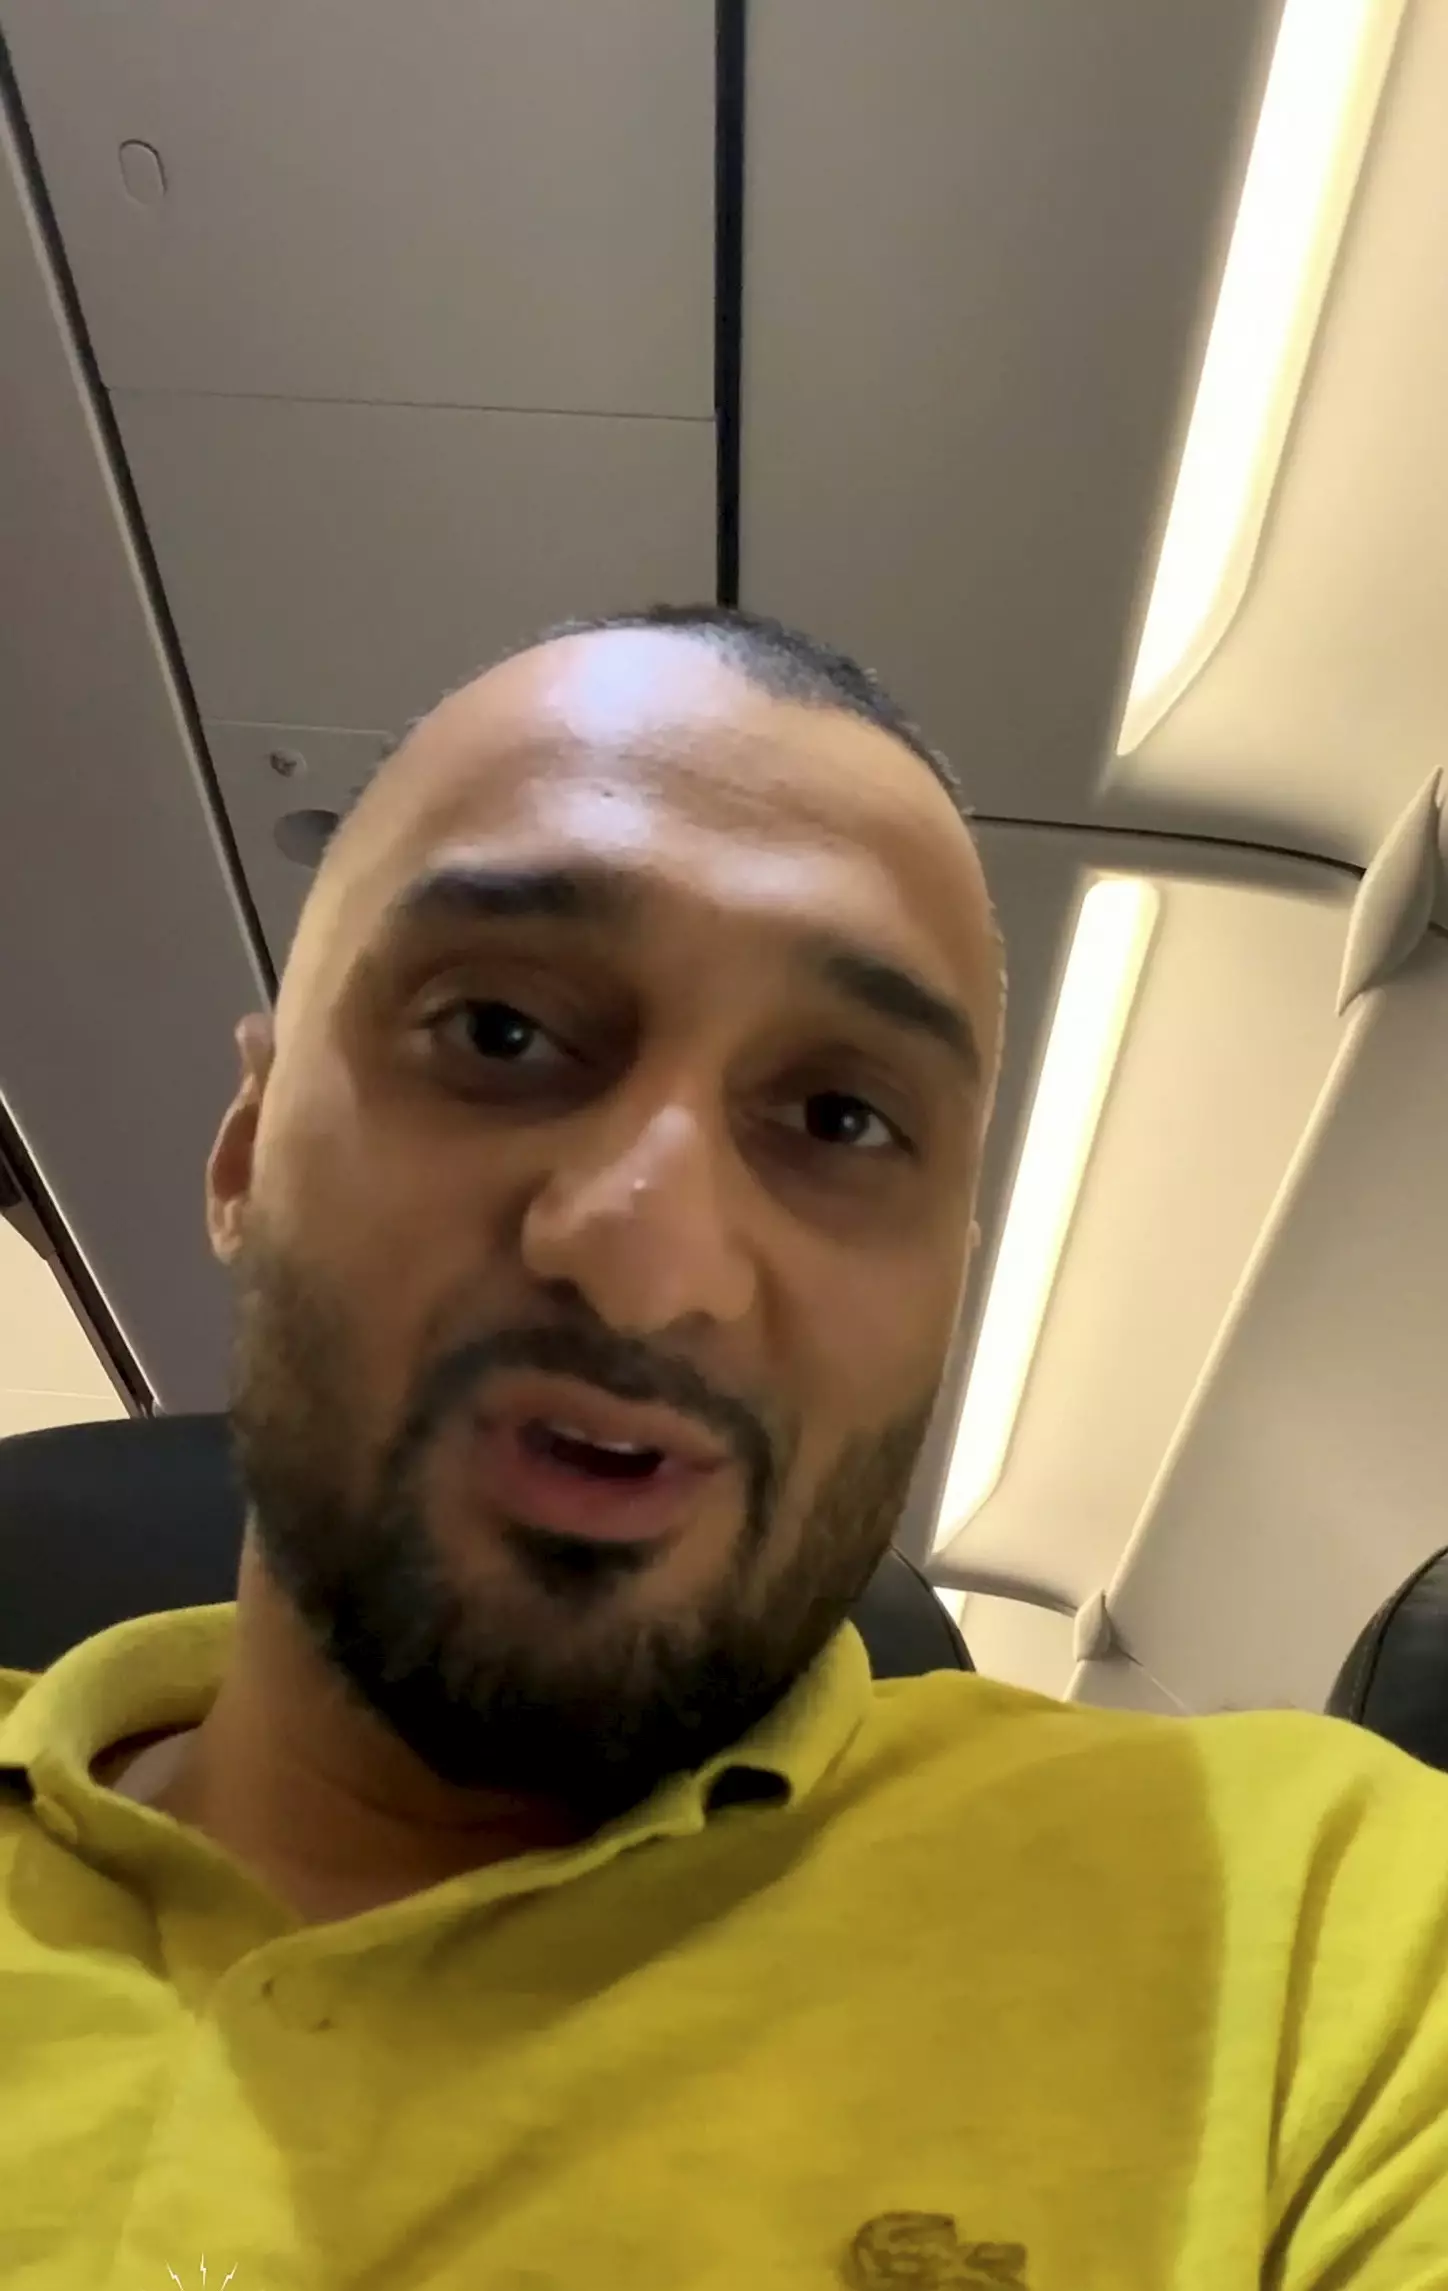 Video grab of Adil as he was sat on the plane.